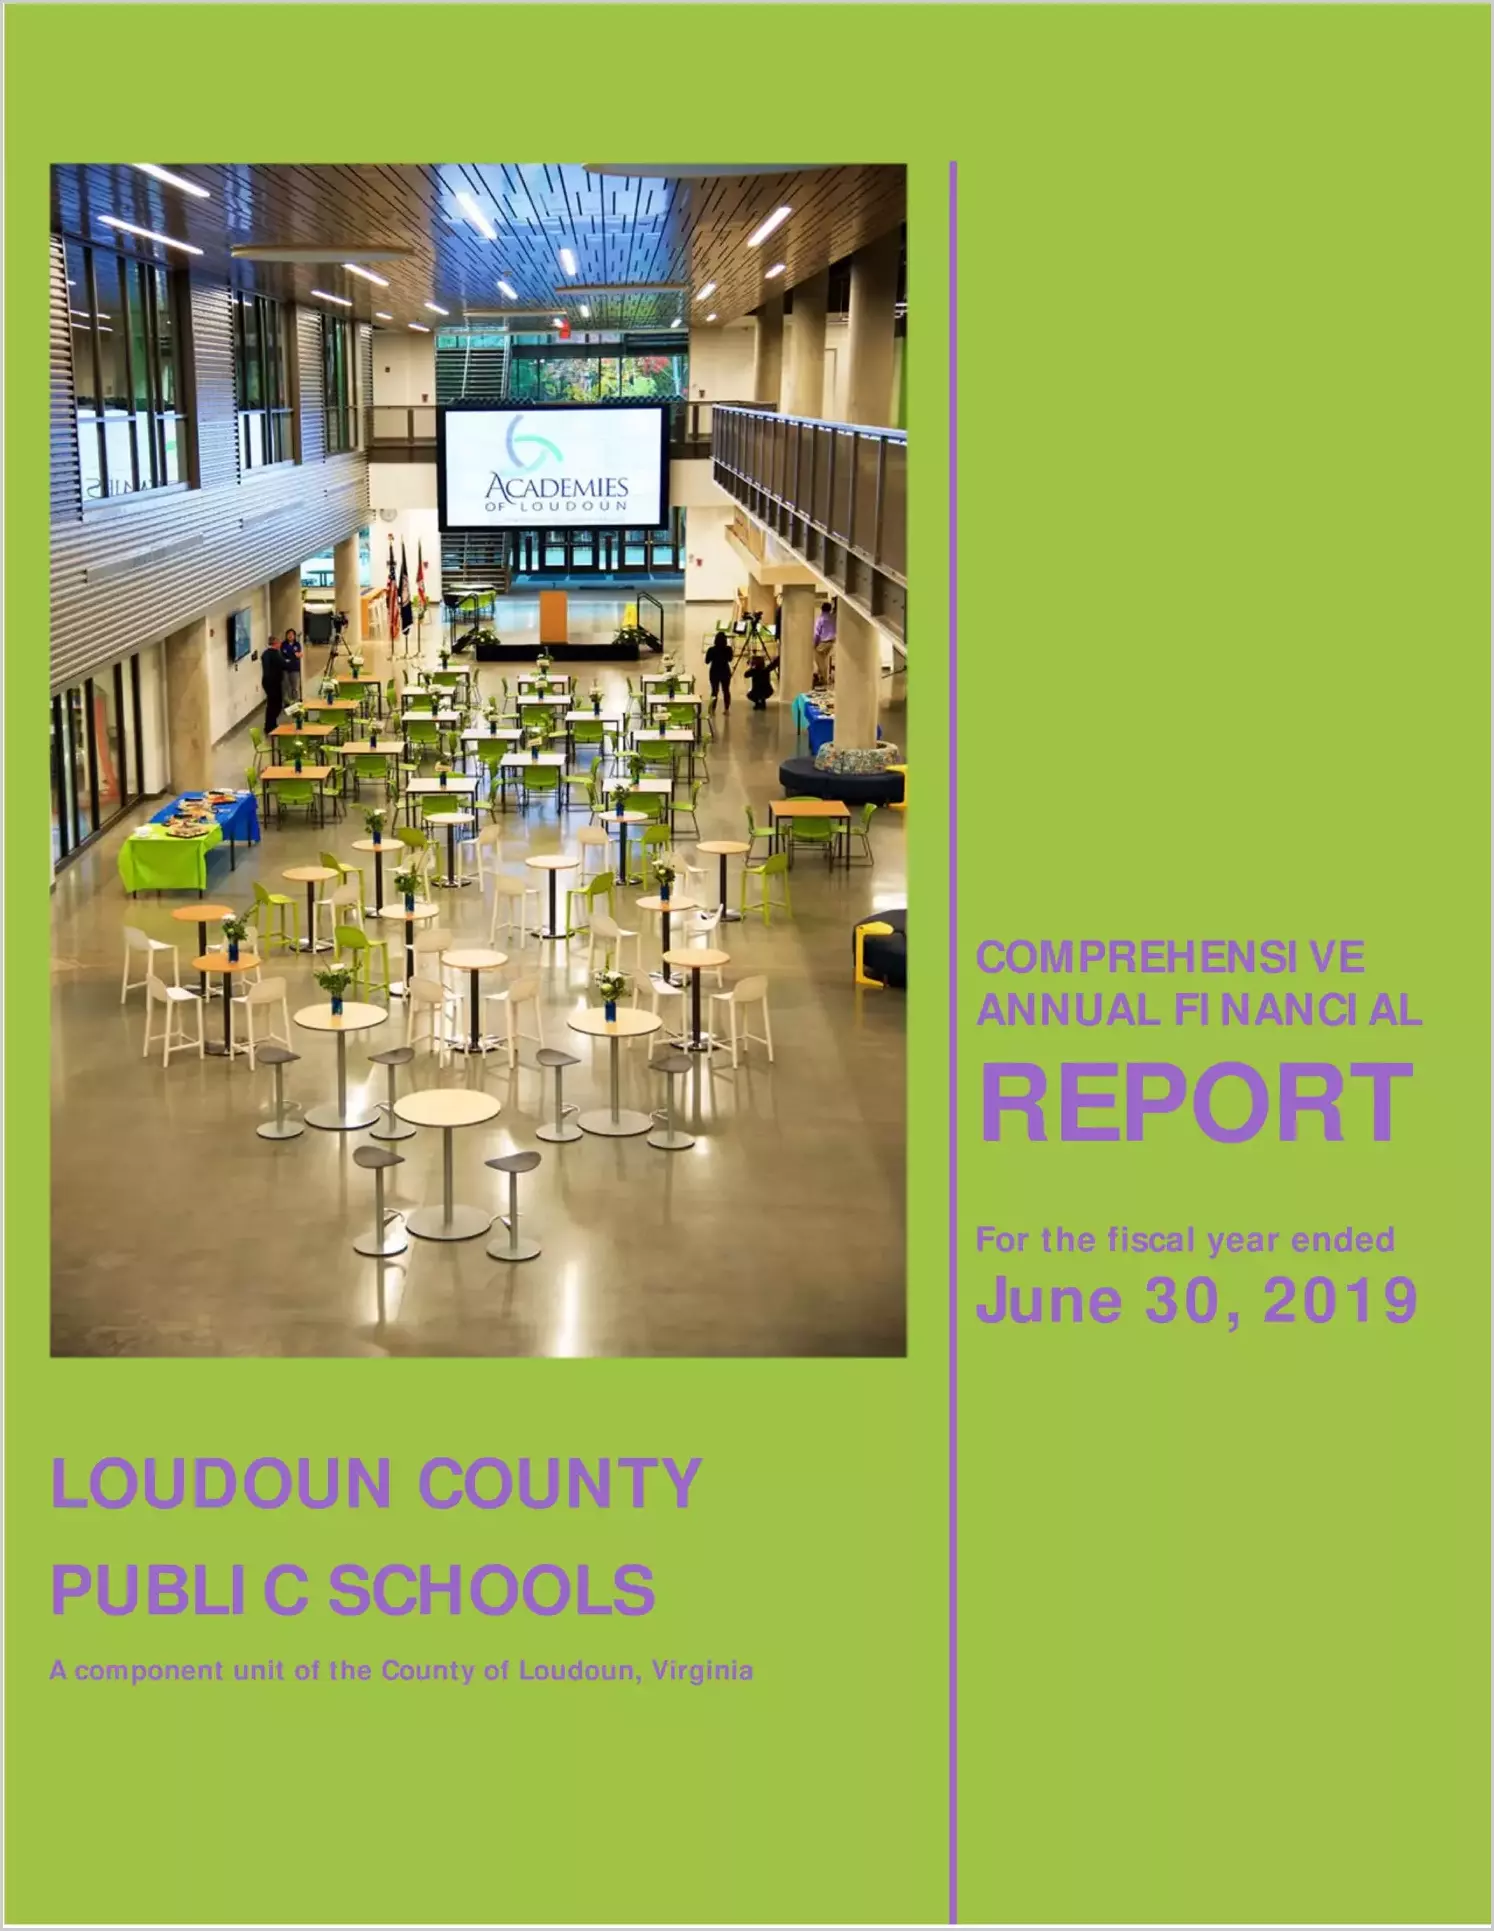 2019 Public Schools Annual Financial Report for County of Loudoun